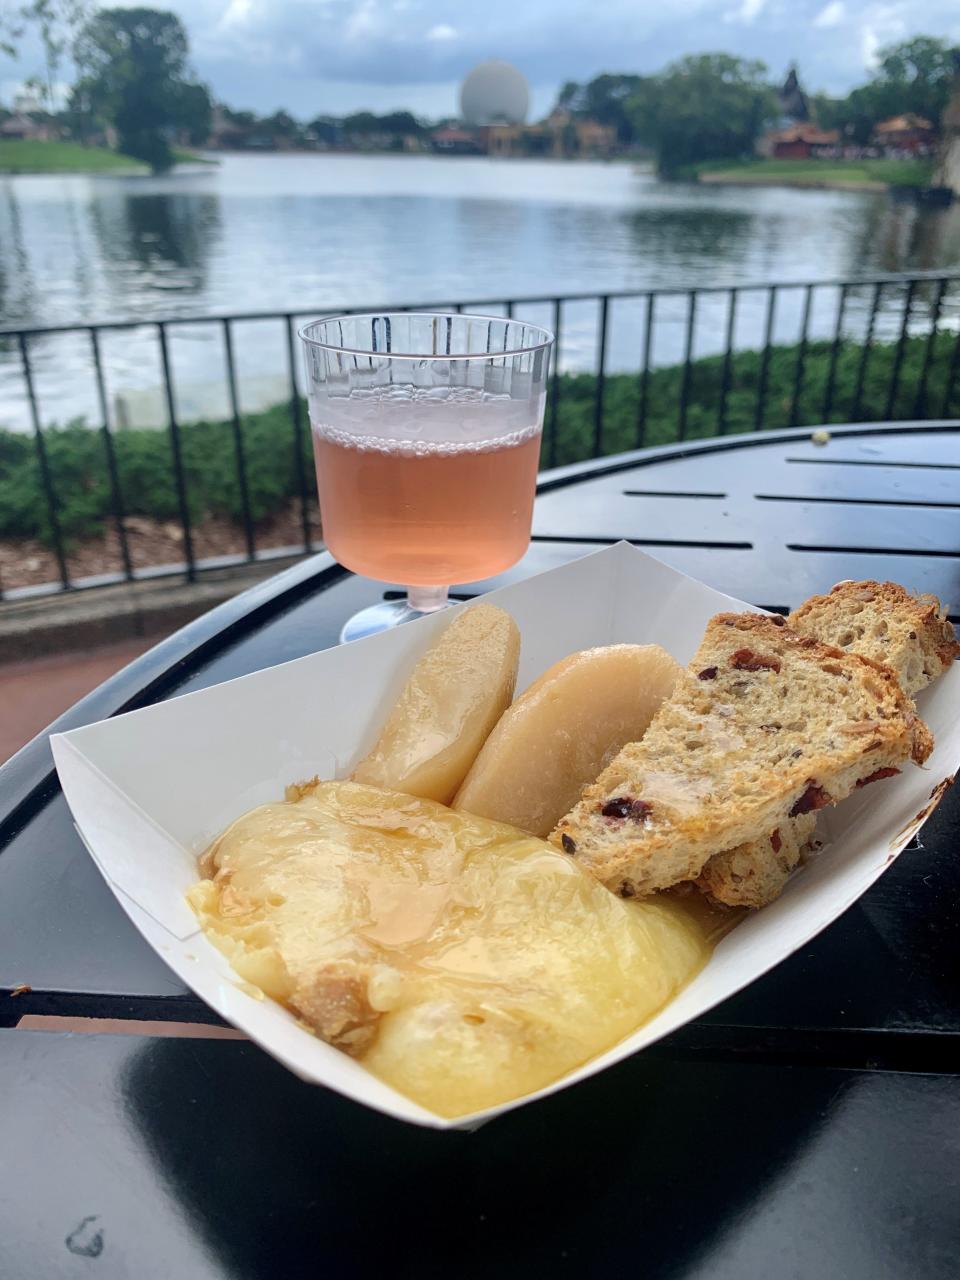 Warm raclette Swiss cheese with Riesling-poached pears, red wine-braised figs, candied pecans, honey and cranberry Toast was one of the dishes at the Alps Kitchen at the EPCOT International Food & Wine Festival. It paired perfectly with a Cave de la Cote Rose Gamay.